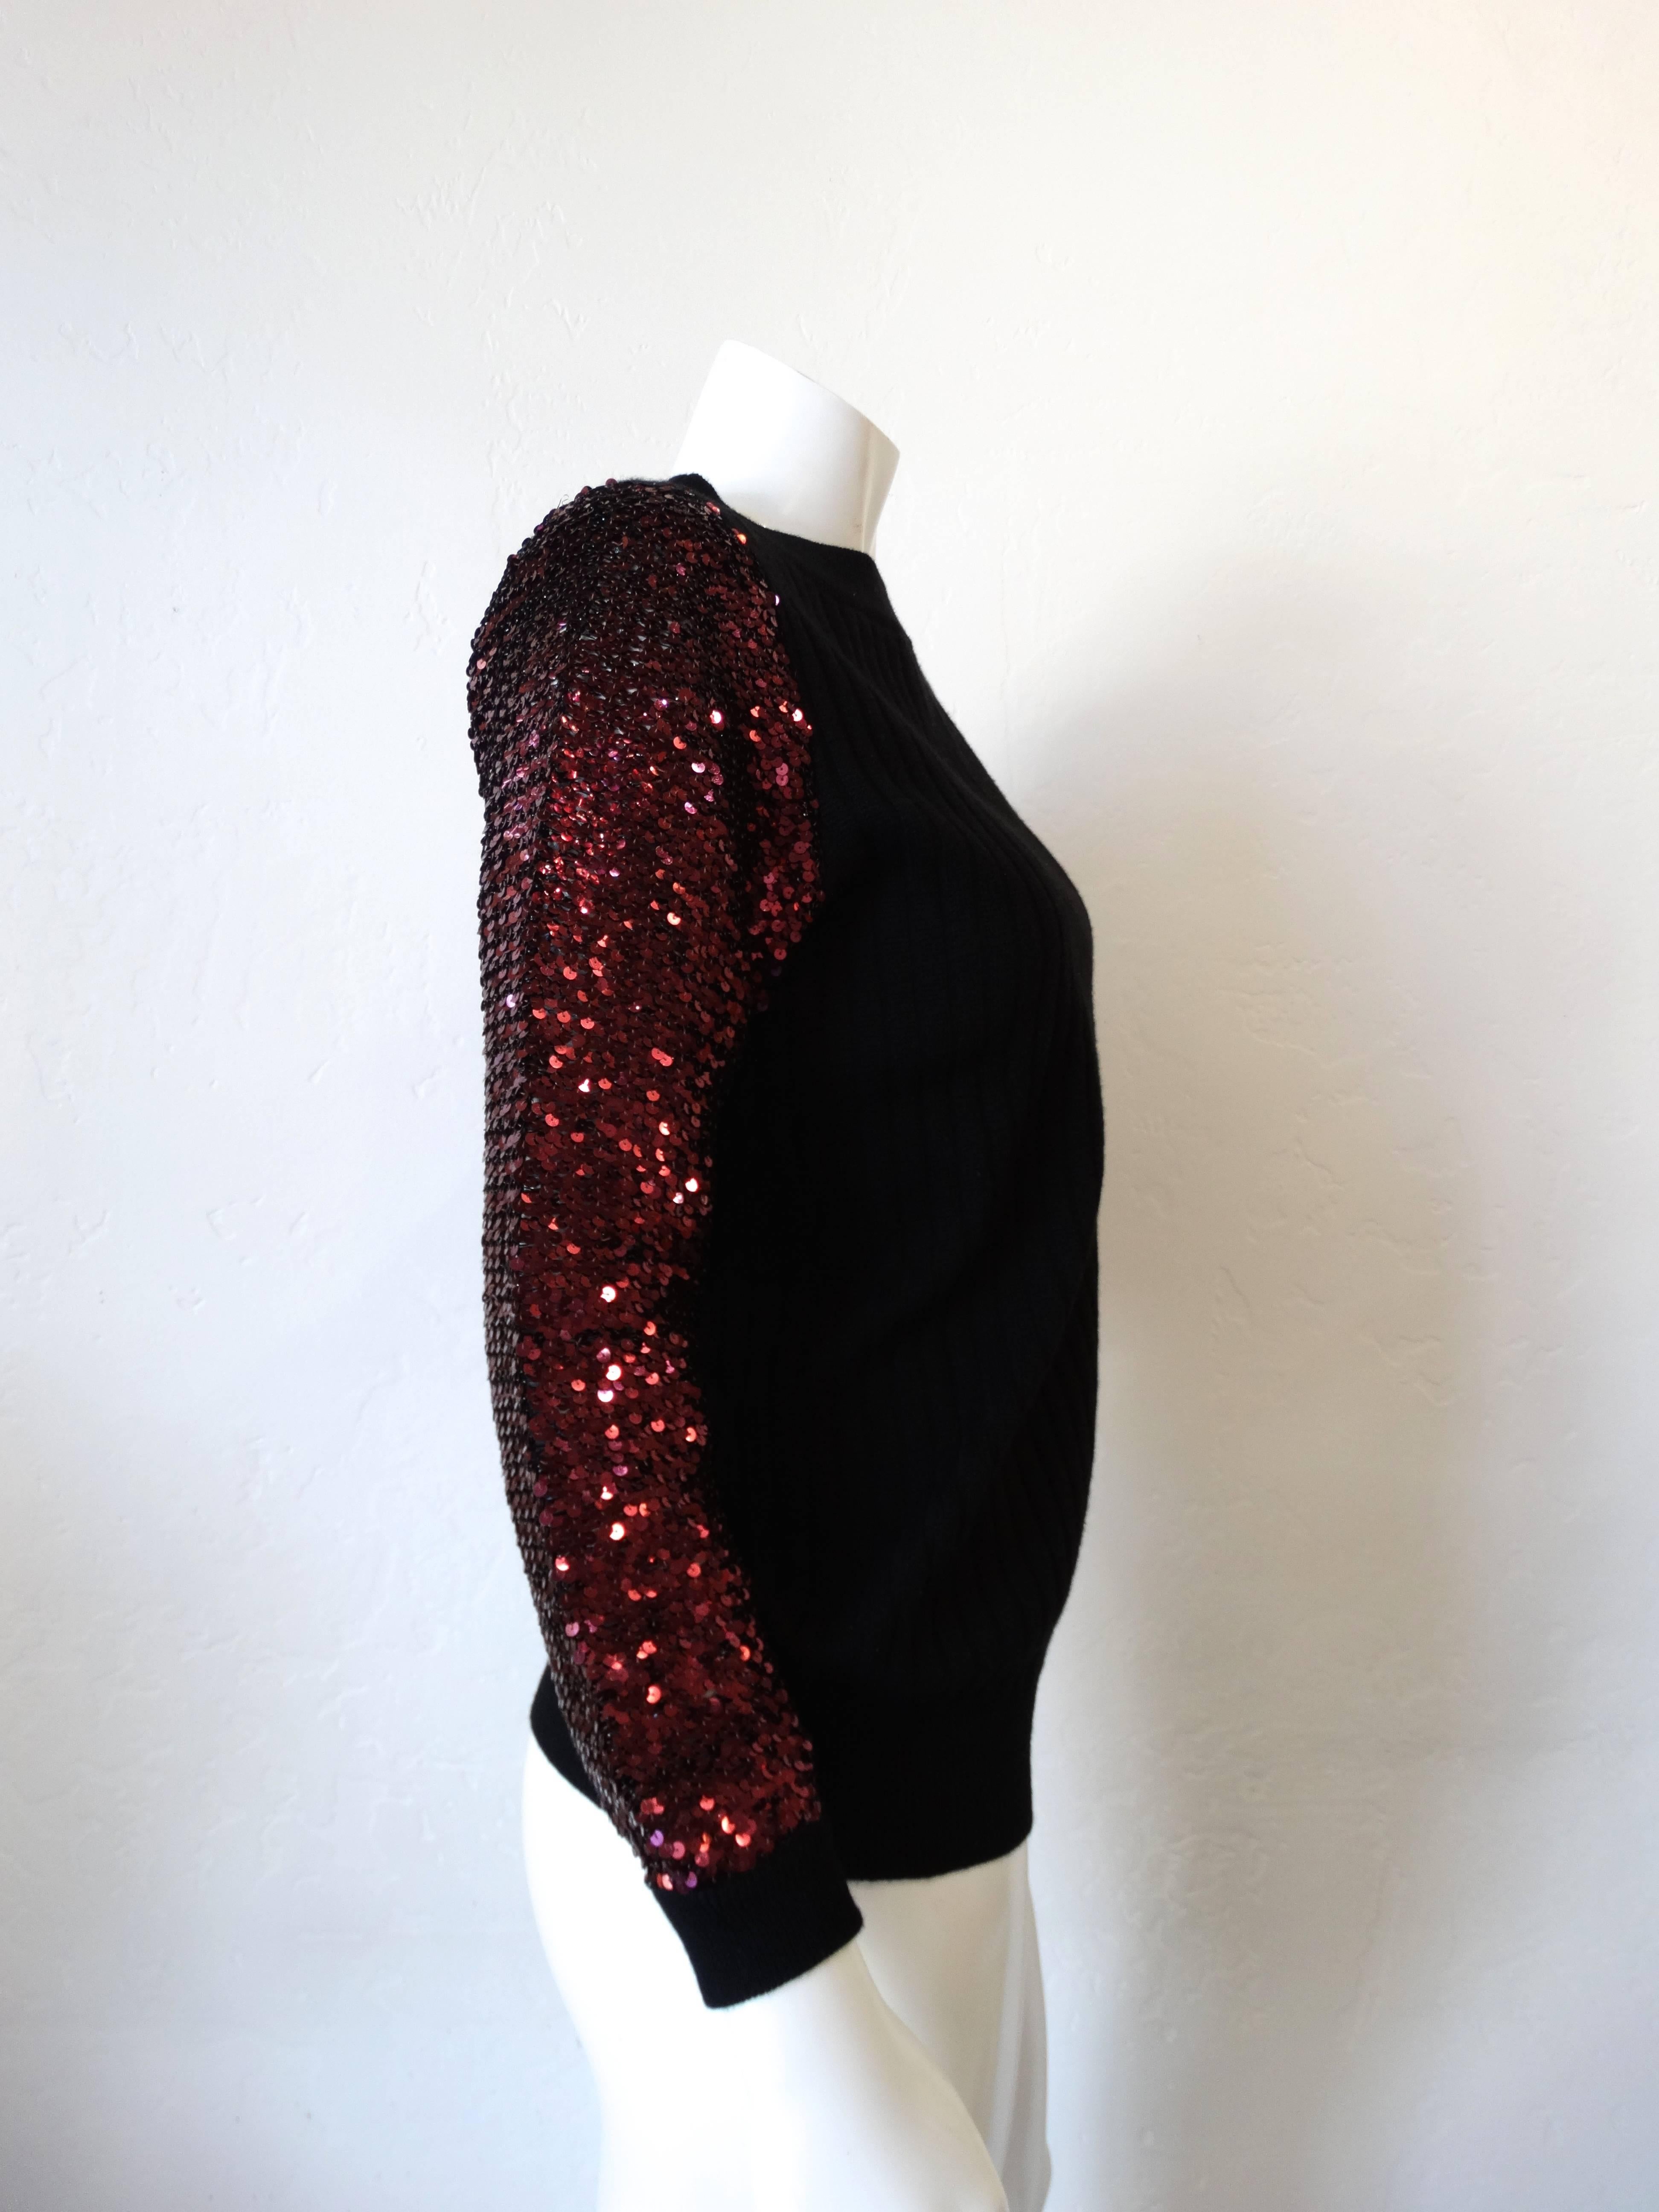 Get festive in our 1970s Saint Laurent Rive Gauche sweater! Black knit ribbed fabric with magenta sequin sleeves! Fabric has some stretch to it which allows for a number of sizes to enjoy! 


Marked a size 38
Bust: 38”
Length: 25”
Sleeve: 28” 